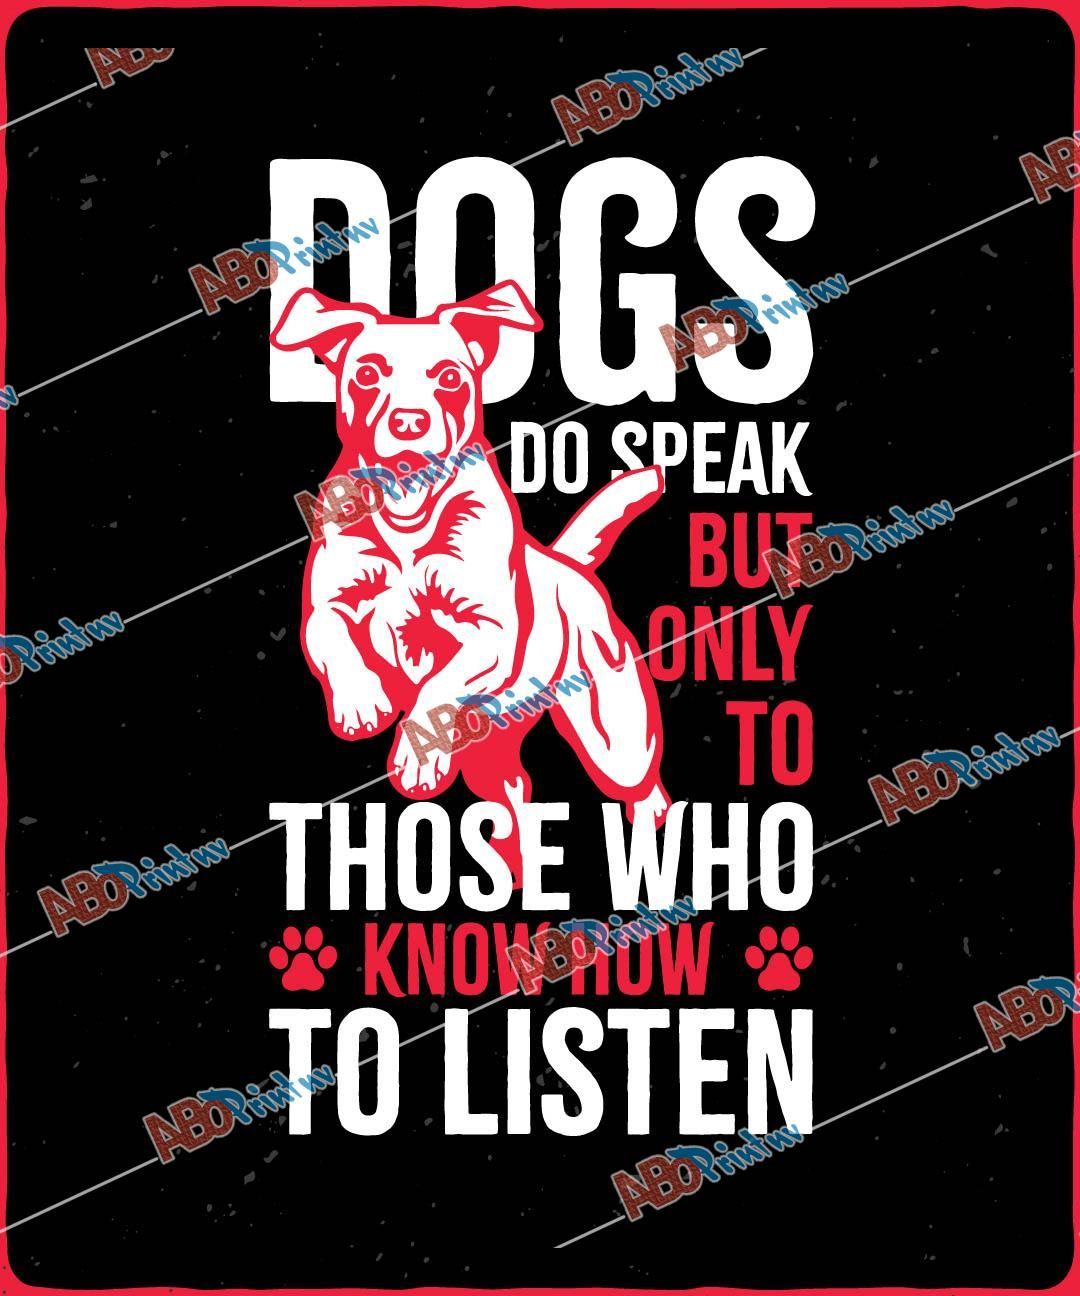 Dogs do speak, but only to those who know how to listenJPG (1).jpg